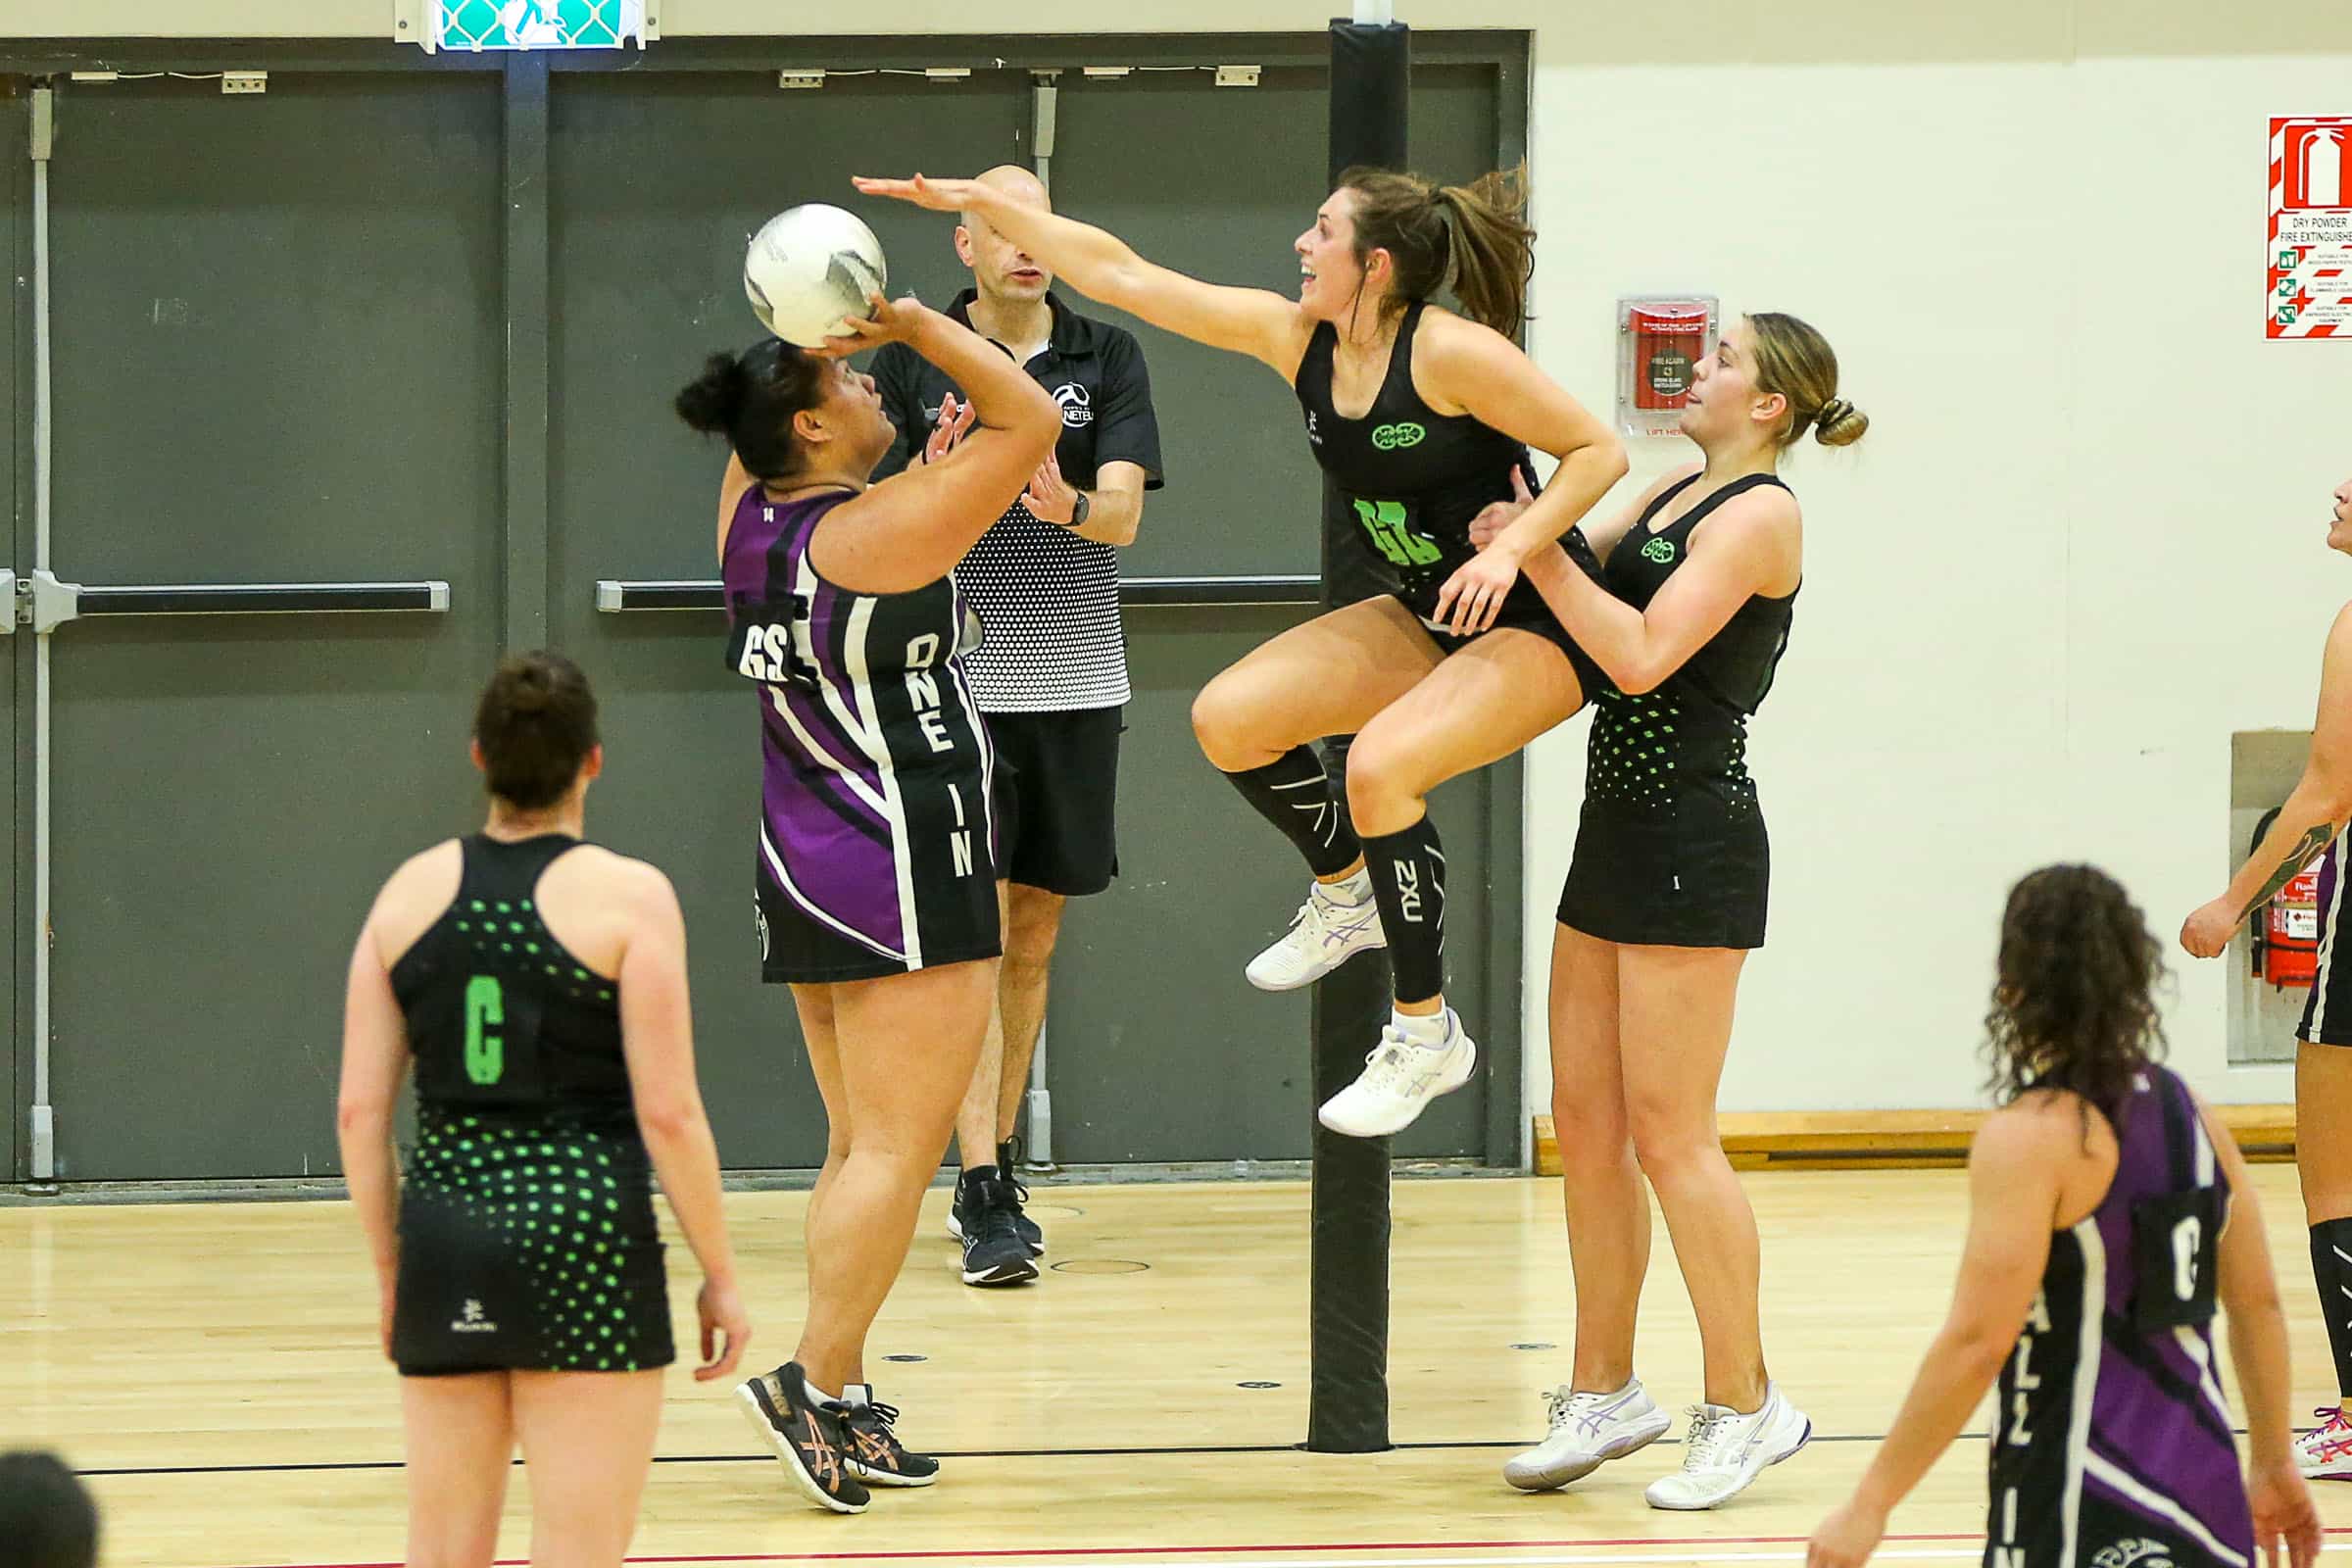 Hawke's Bay Premier netball final, at the Pettigrew Green Arena in Taradale, Napier. All In v Otane. All In won the match. Photographer Paul Taylor Hawke's Bay Today23rd August 2023